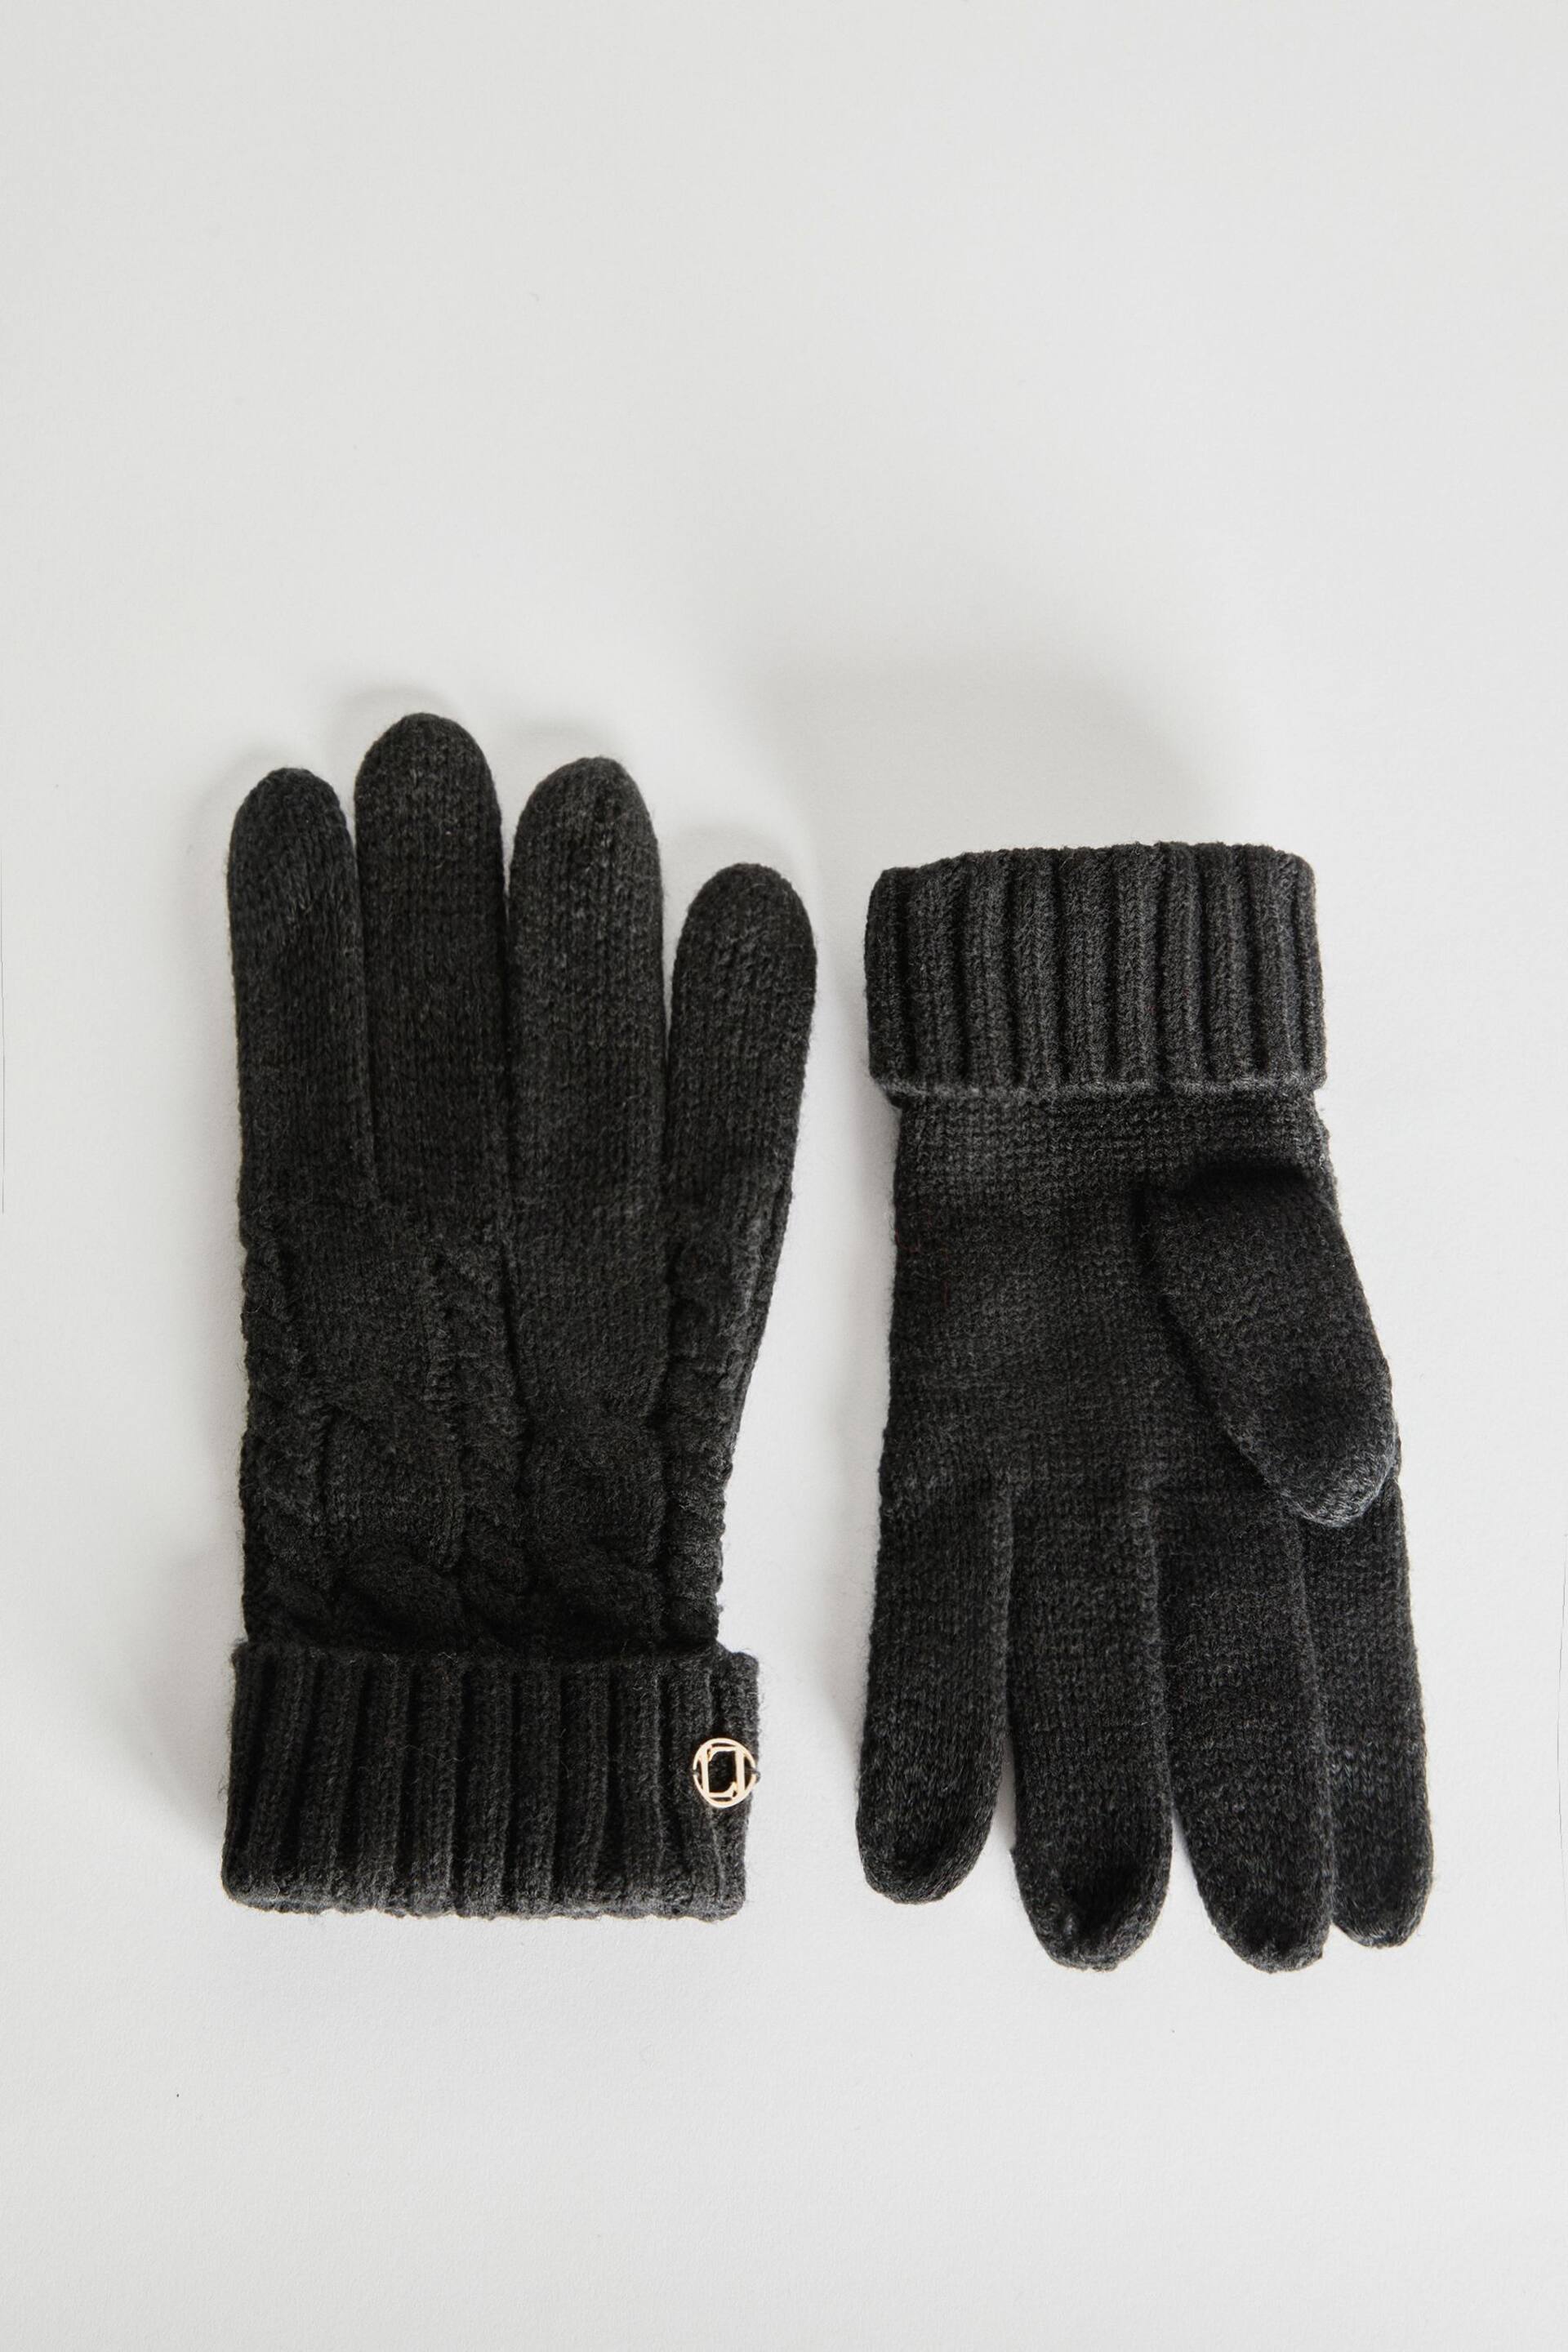 Lipsy Black Cosy Cable Gloves - Image 1 of 3